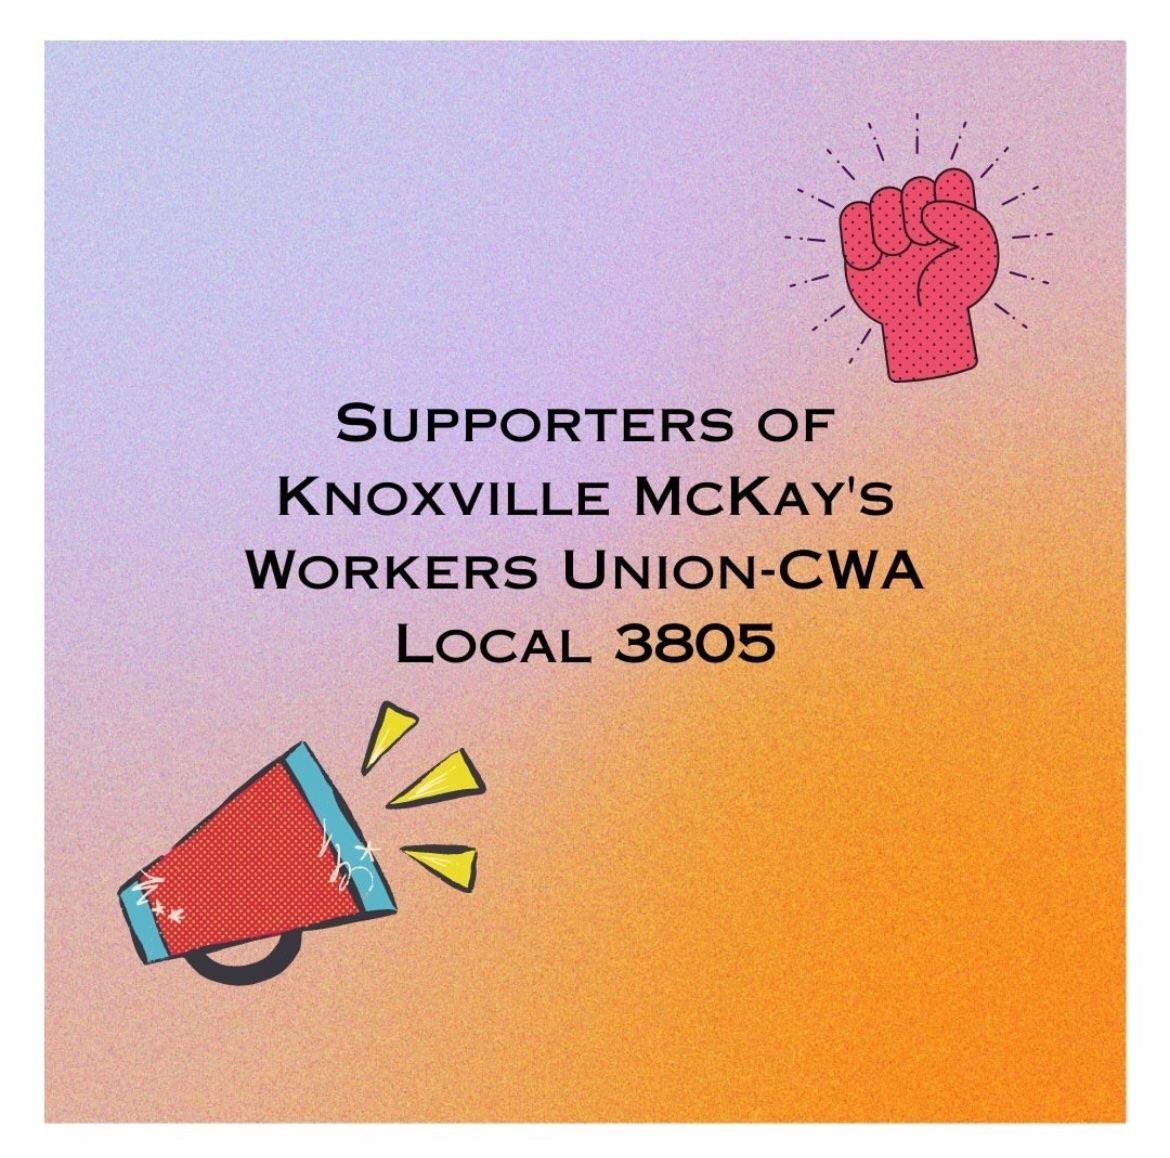 We deserve a Fair First Contract, but McKay’s owners are using delay and other union-busting tactics. Lend your voice of solidarity! Sign to ask McKay’s owners and corporate management to come to the table and bargain a fair first contract in good faith. bit.ly/mckays-bargain…